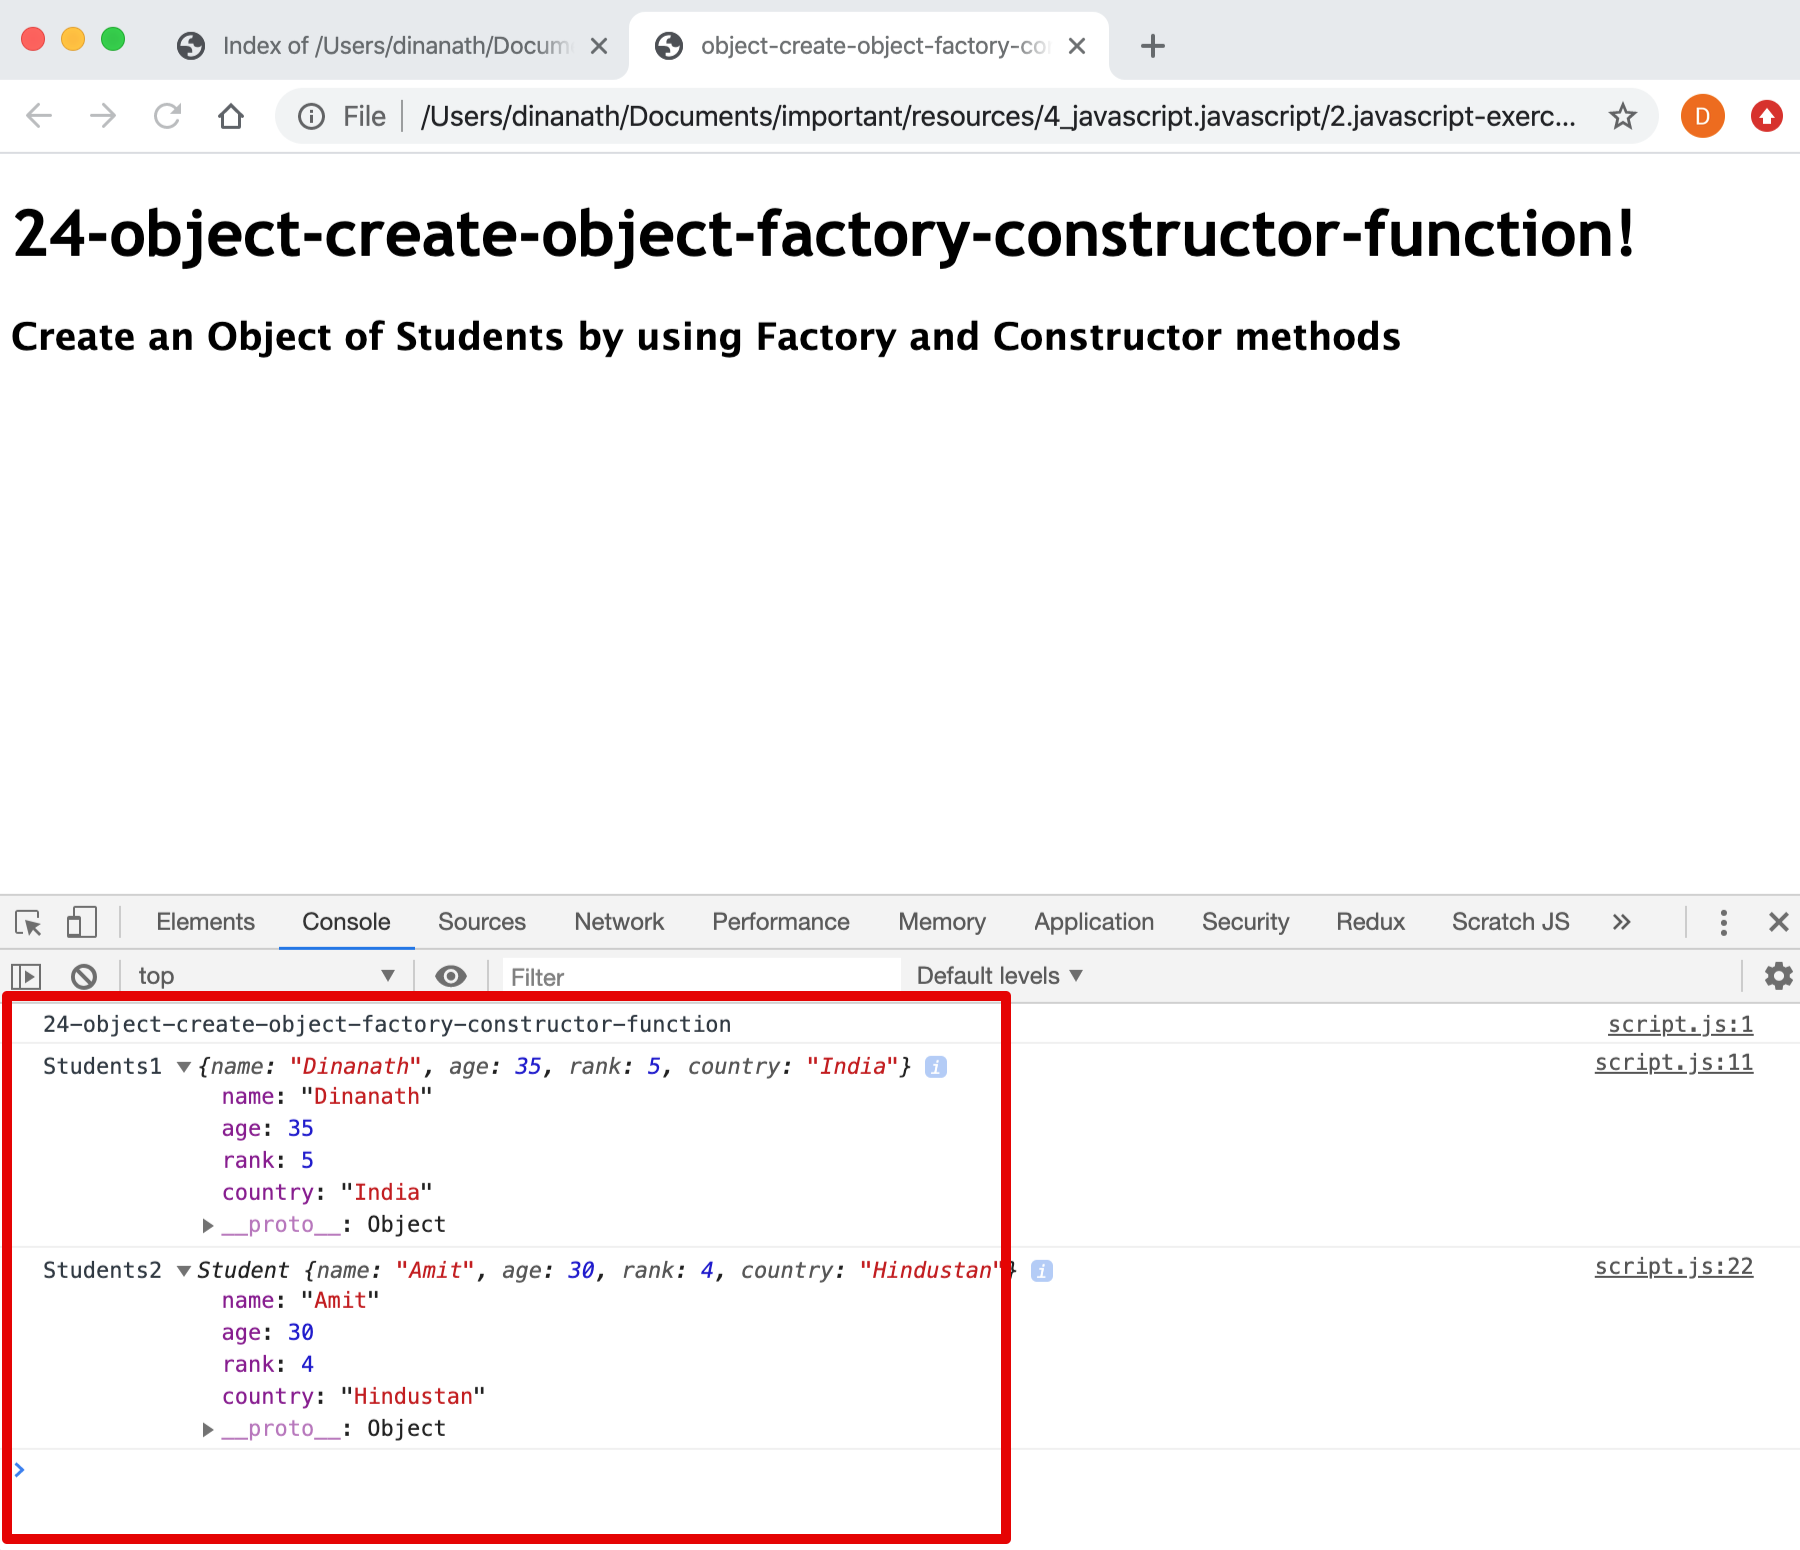 24-object-create-object-factory-constructor-function.png